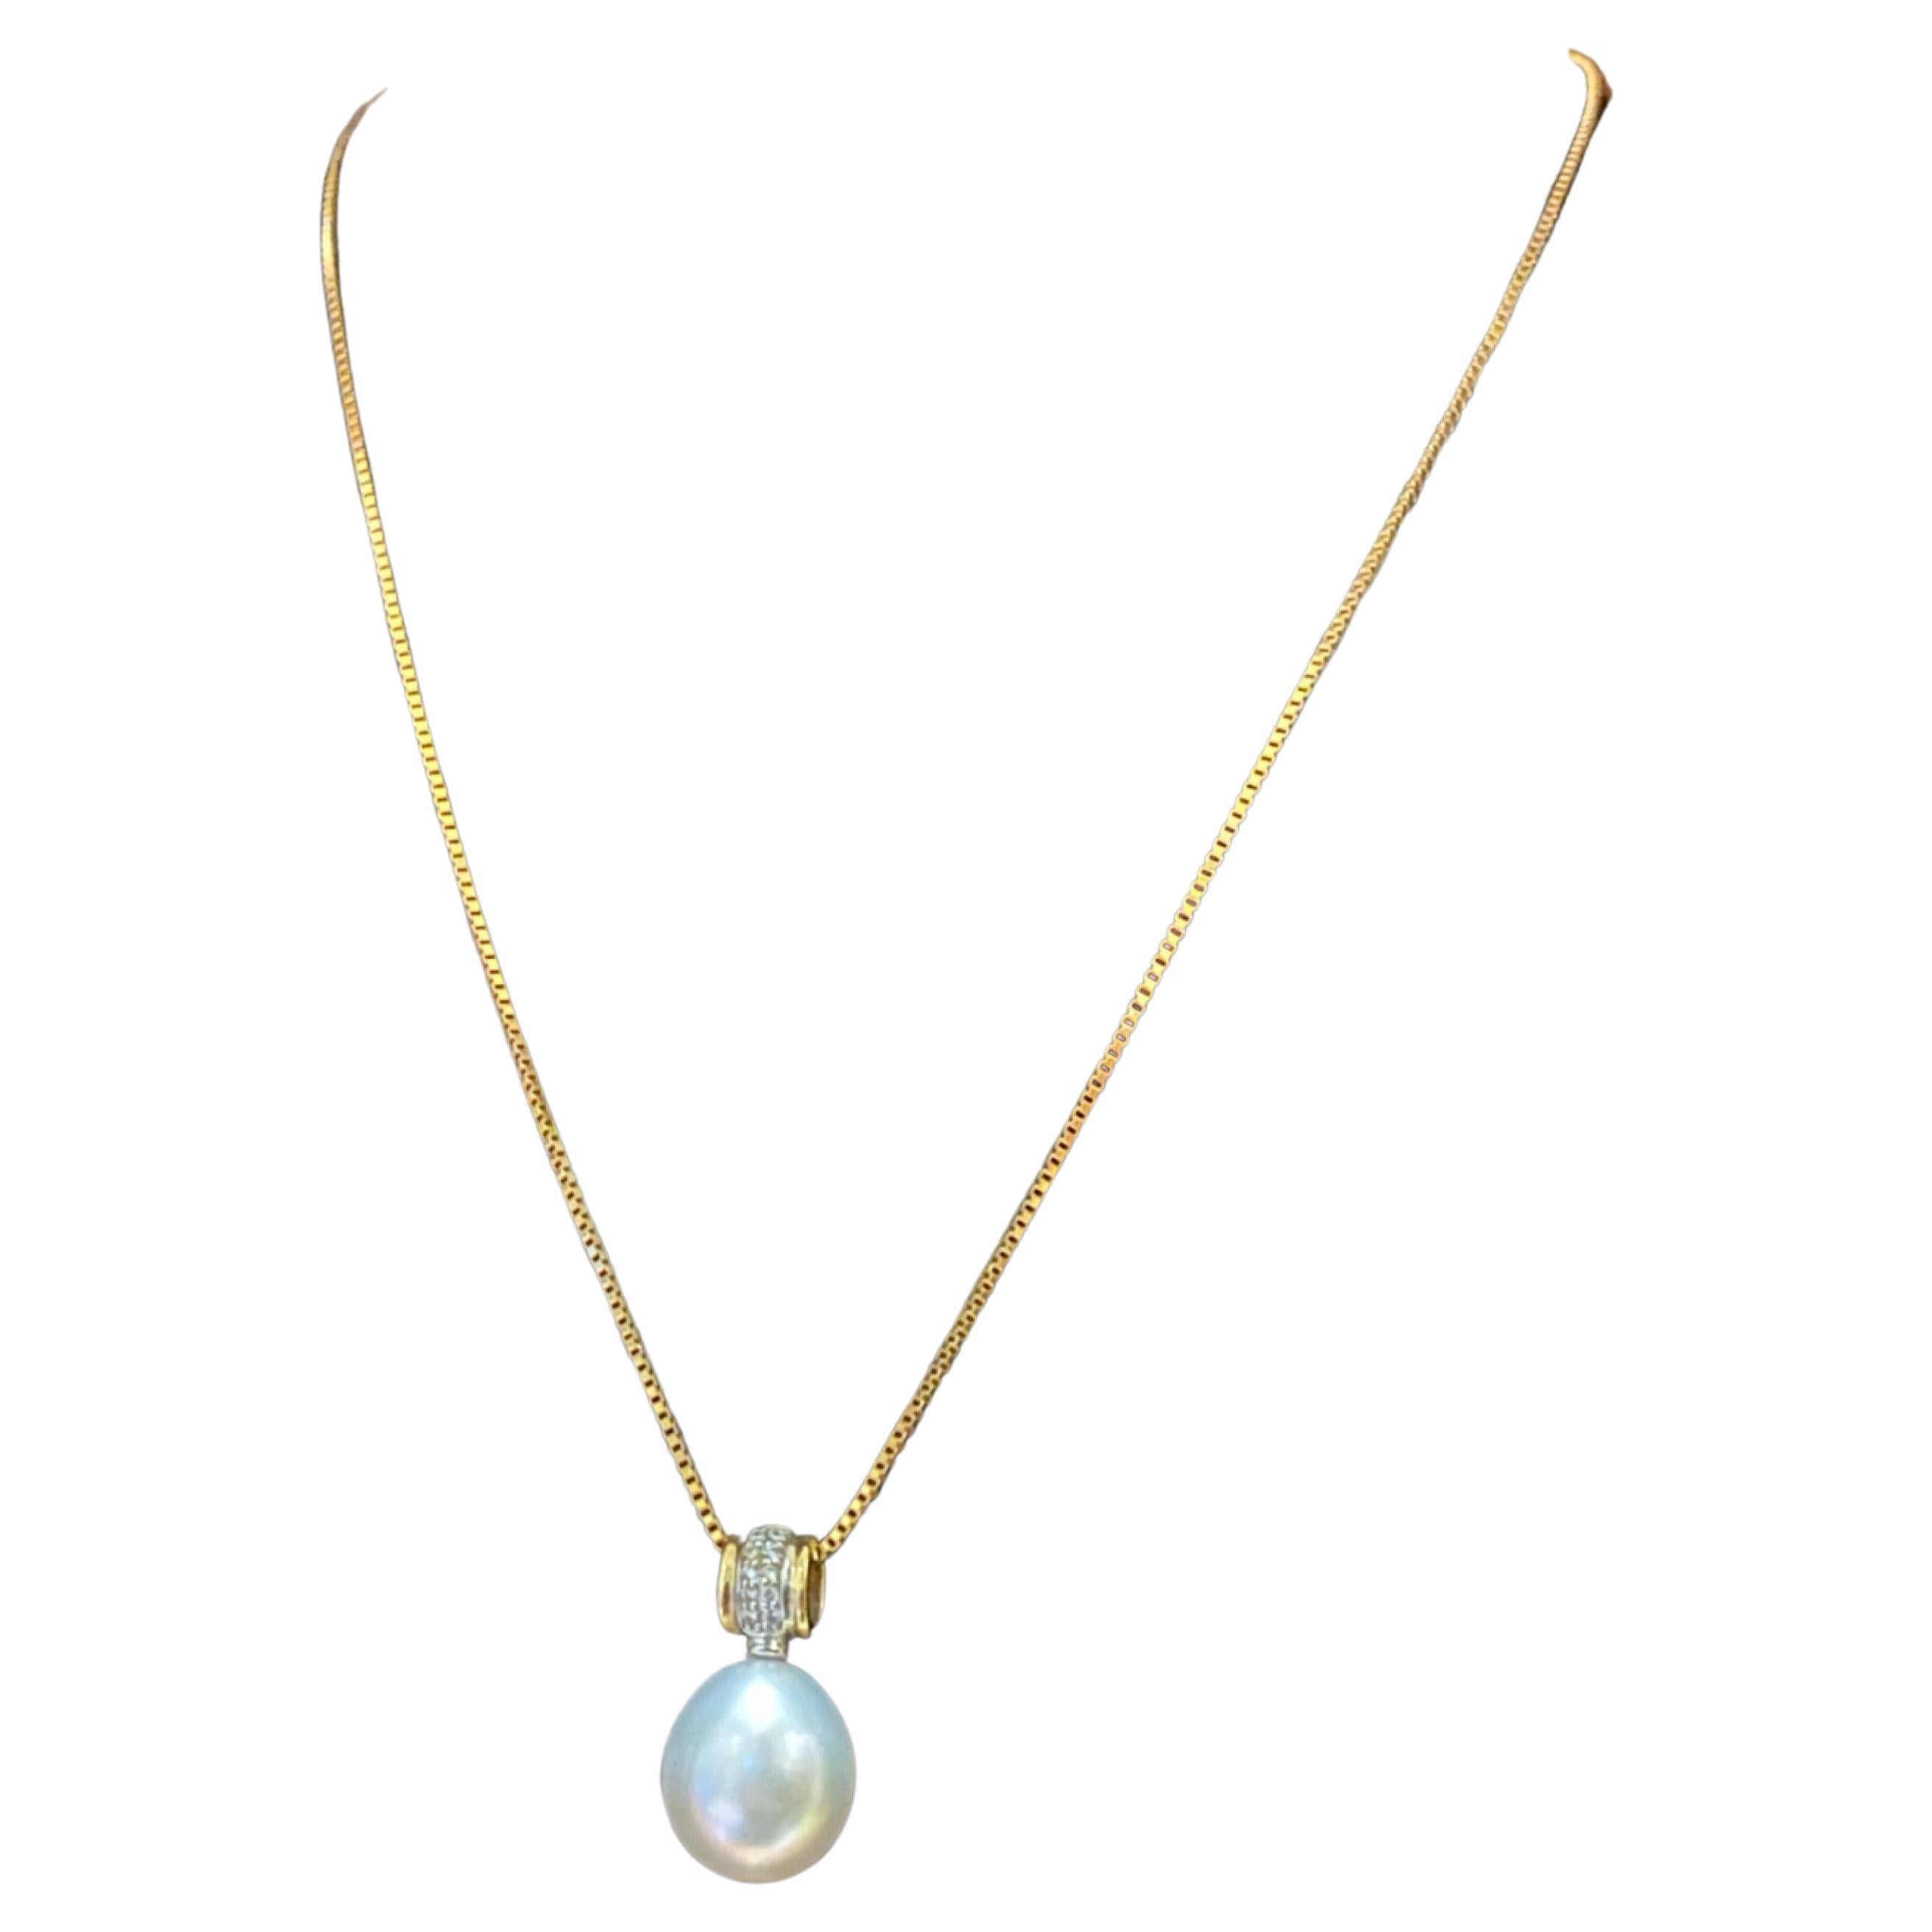 Featuring a oval-shaped
Cultured South Sea Pearl
of mirror-like luster & 
of desirable creme / ivory colour 
measuring 13mm x 15mm approx. 

Topped by a solid bail, 
meticulously crafted in 18K white & yellow gold 
(stamped 750), 
embellished with a